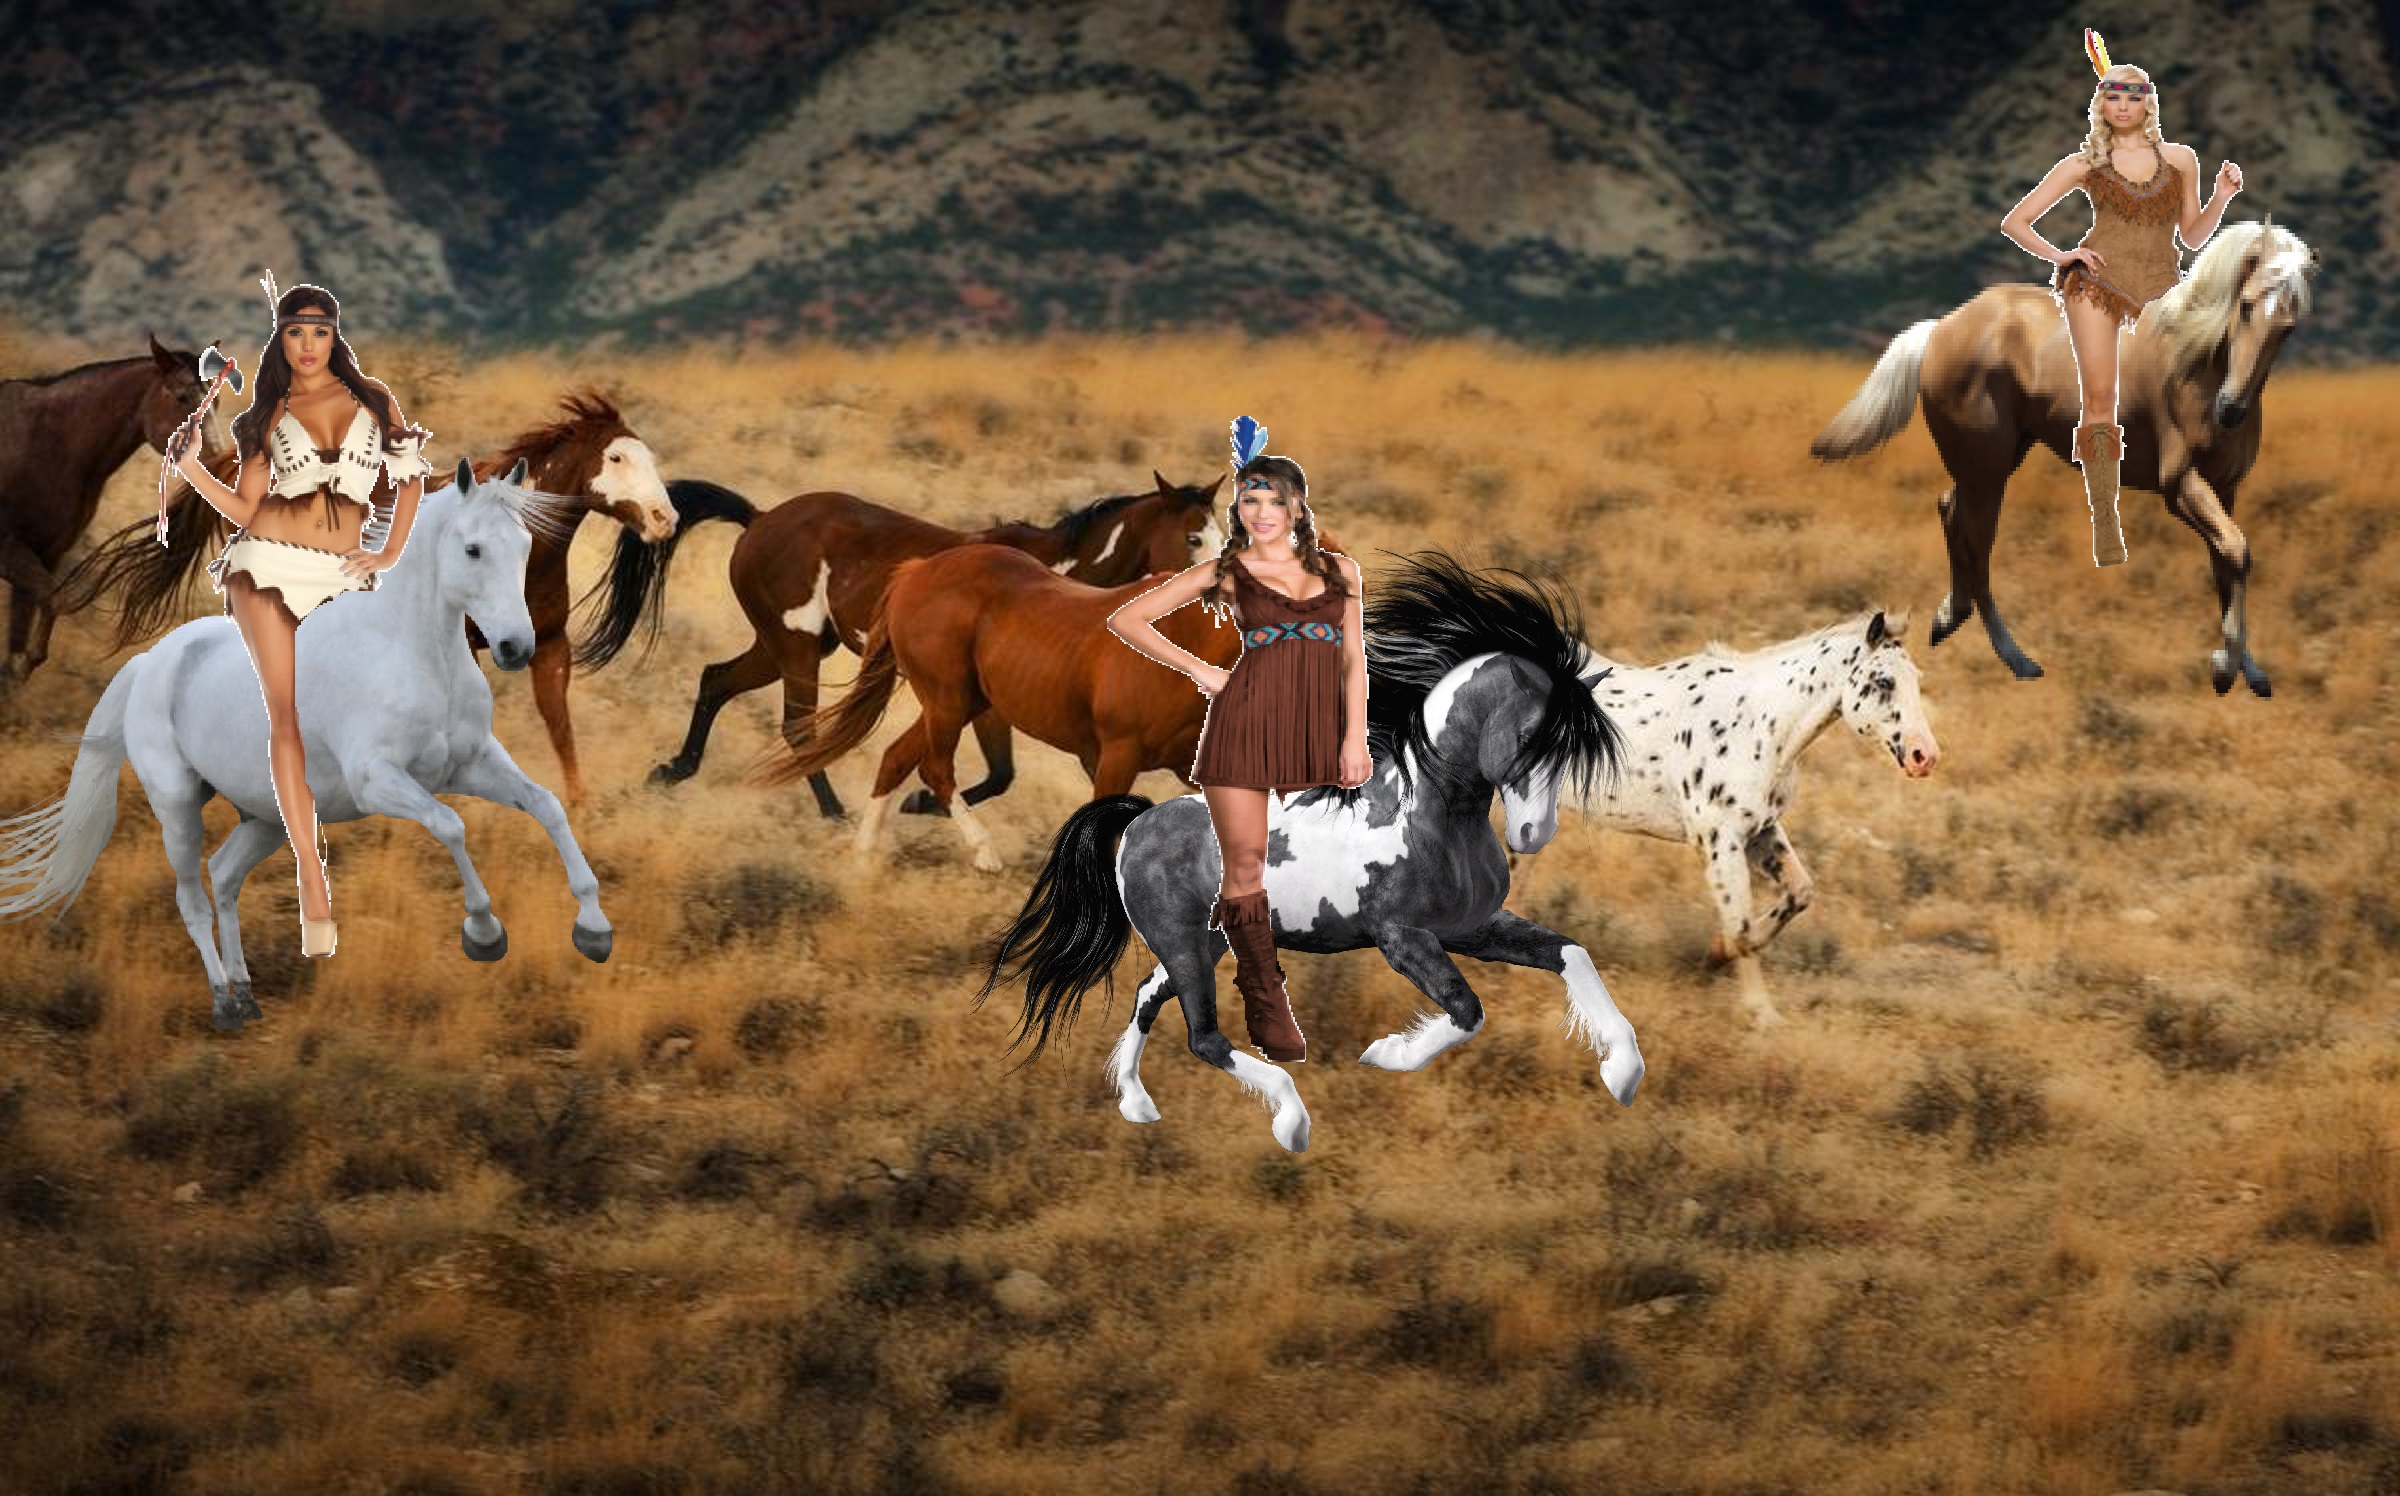 Native Americans images 3 hot brave native american women riding ...